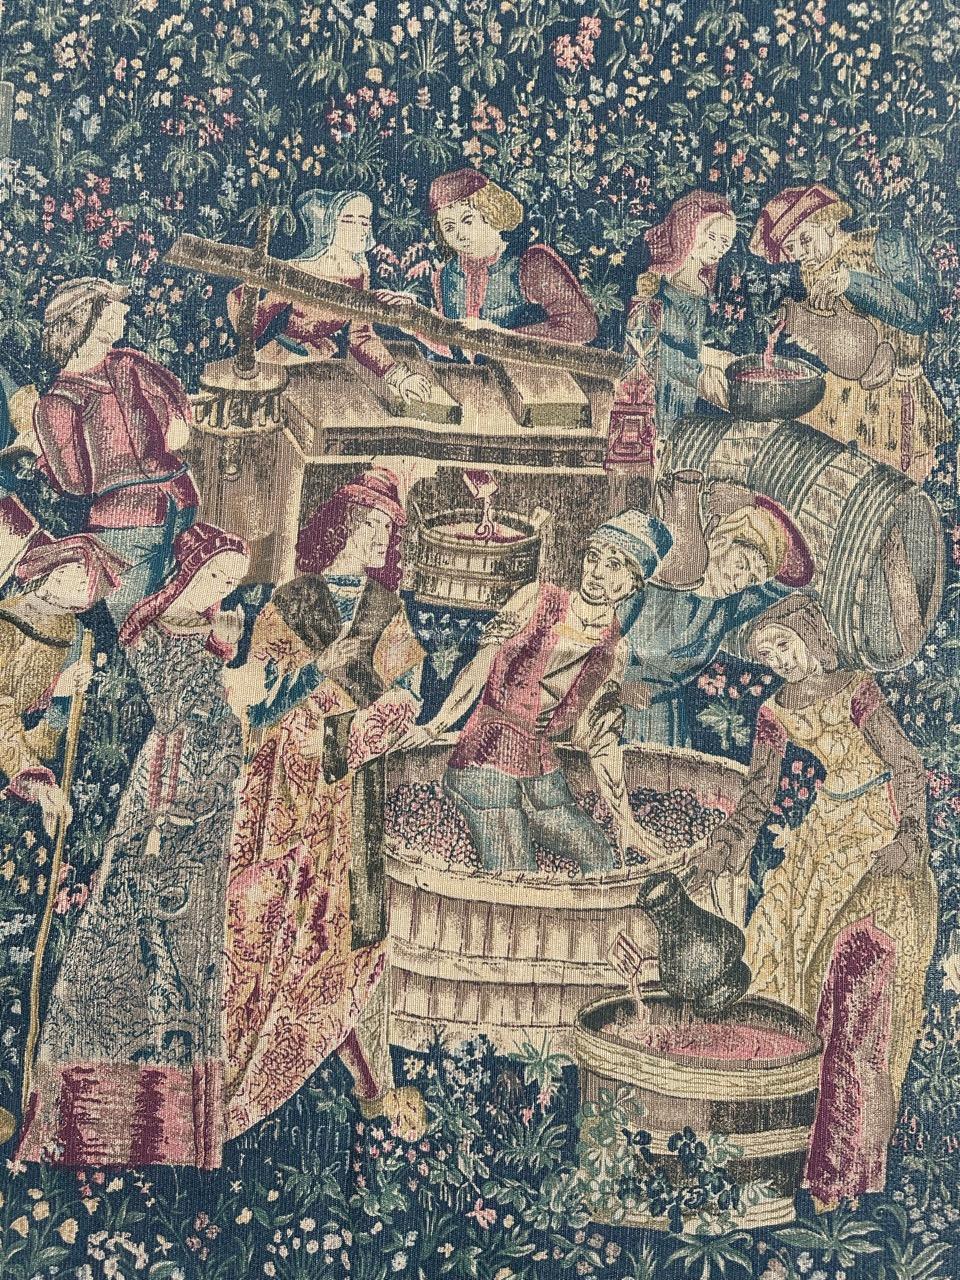 Discover the elegance of this mid-century French hand-printed tapestry featuring the exquisite design of the left half (the pressing side) of the renowned medieval museum tapestry, 